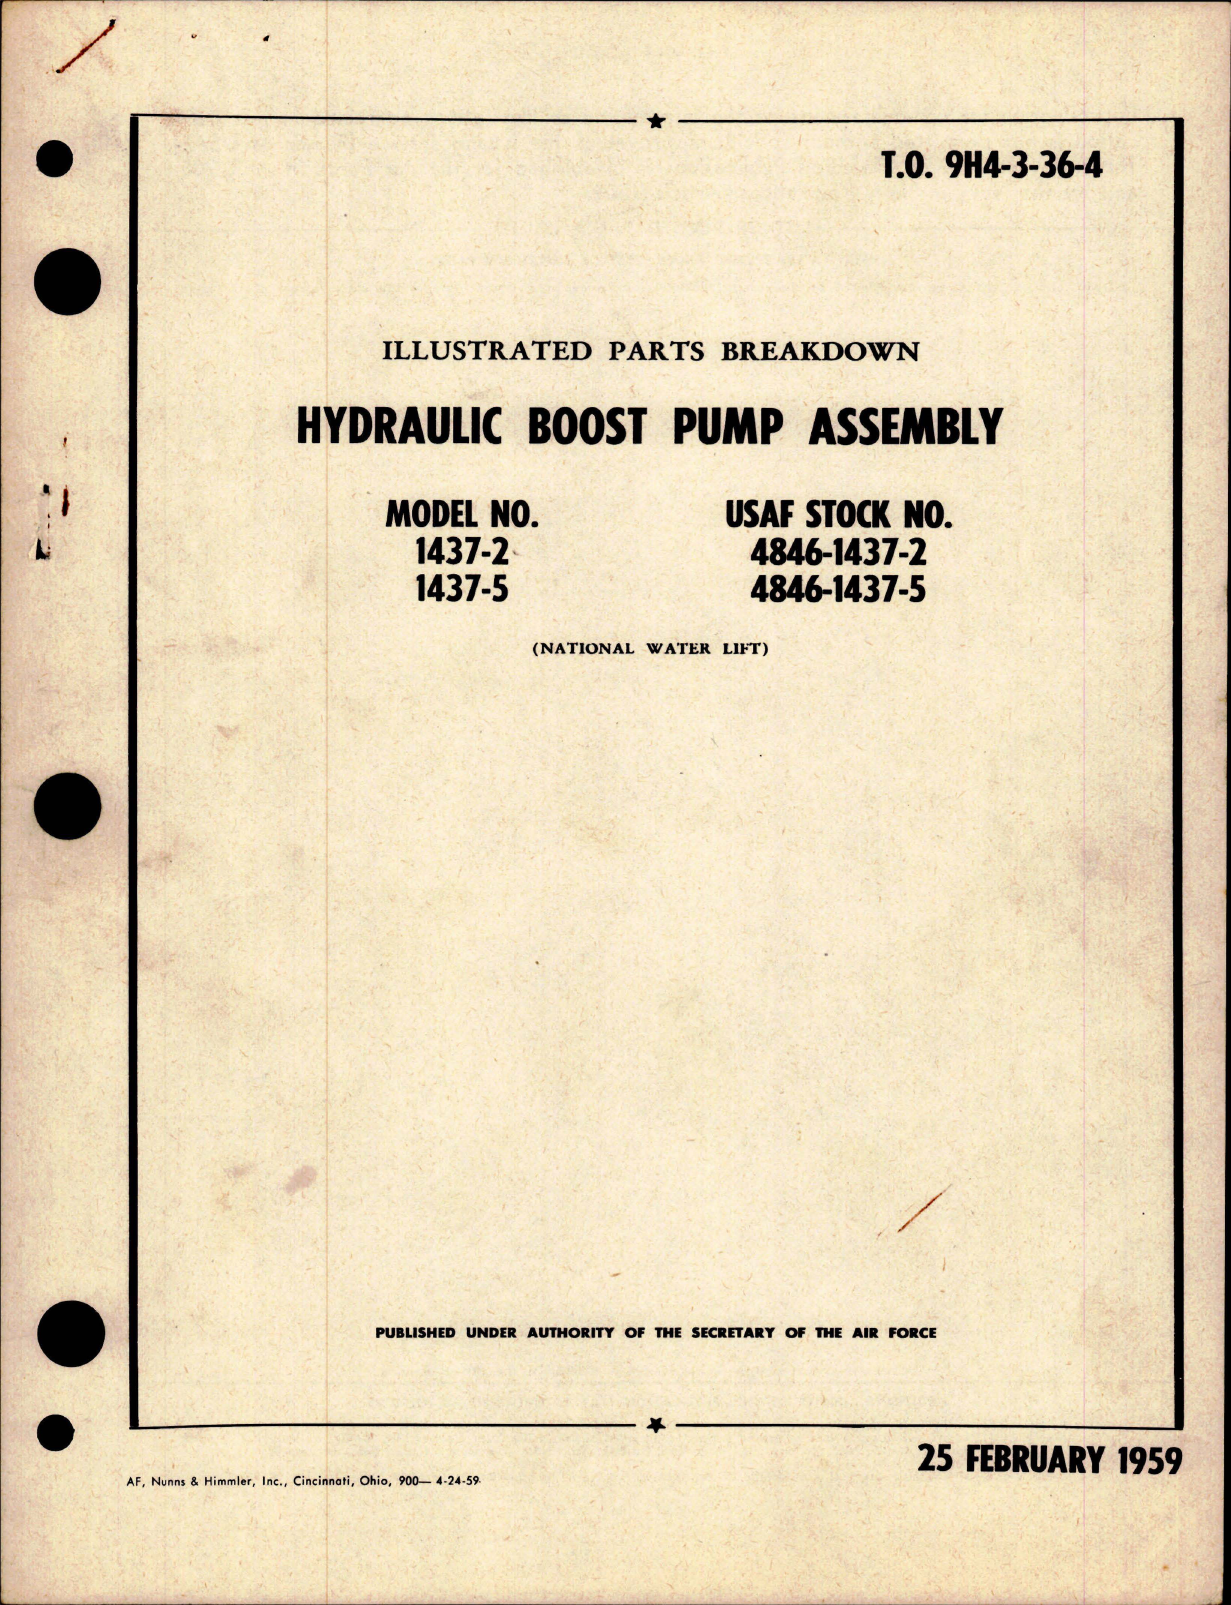 Sample page 1 from AirCorps Library document: Illustrated Parts Breakdown for Hydraulic Boost Pump Assembly - Models 1437-2 and 1437-5